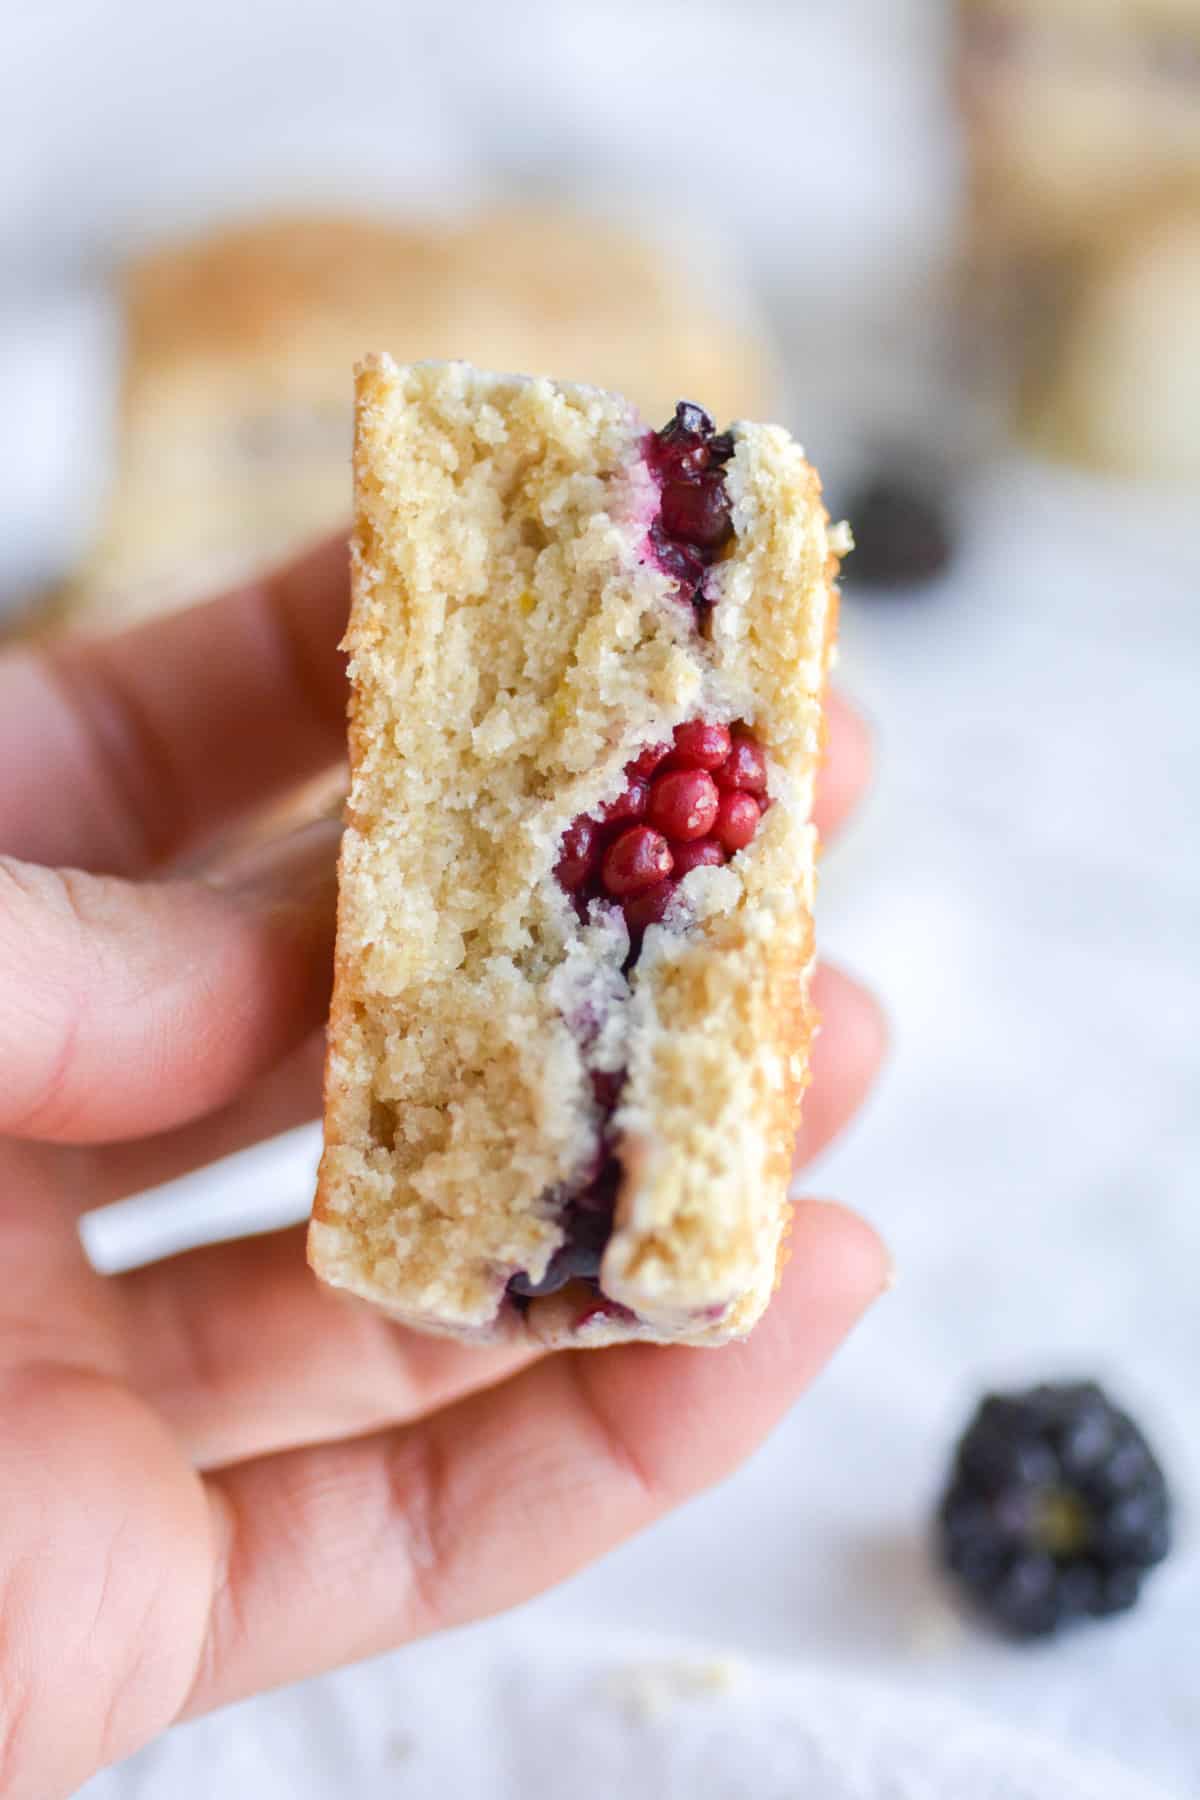 Hand holding a cross section of dairy free gluten free blackberry scone